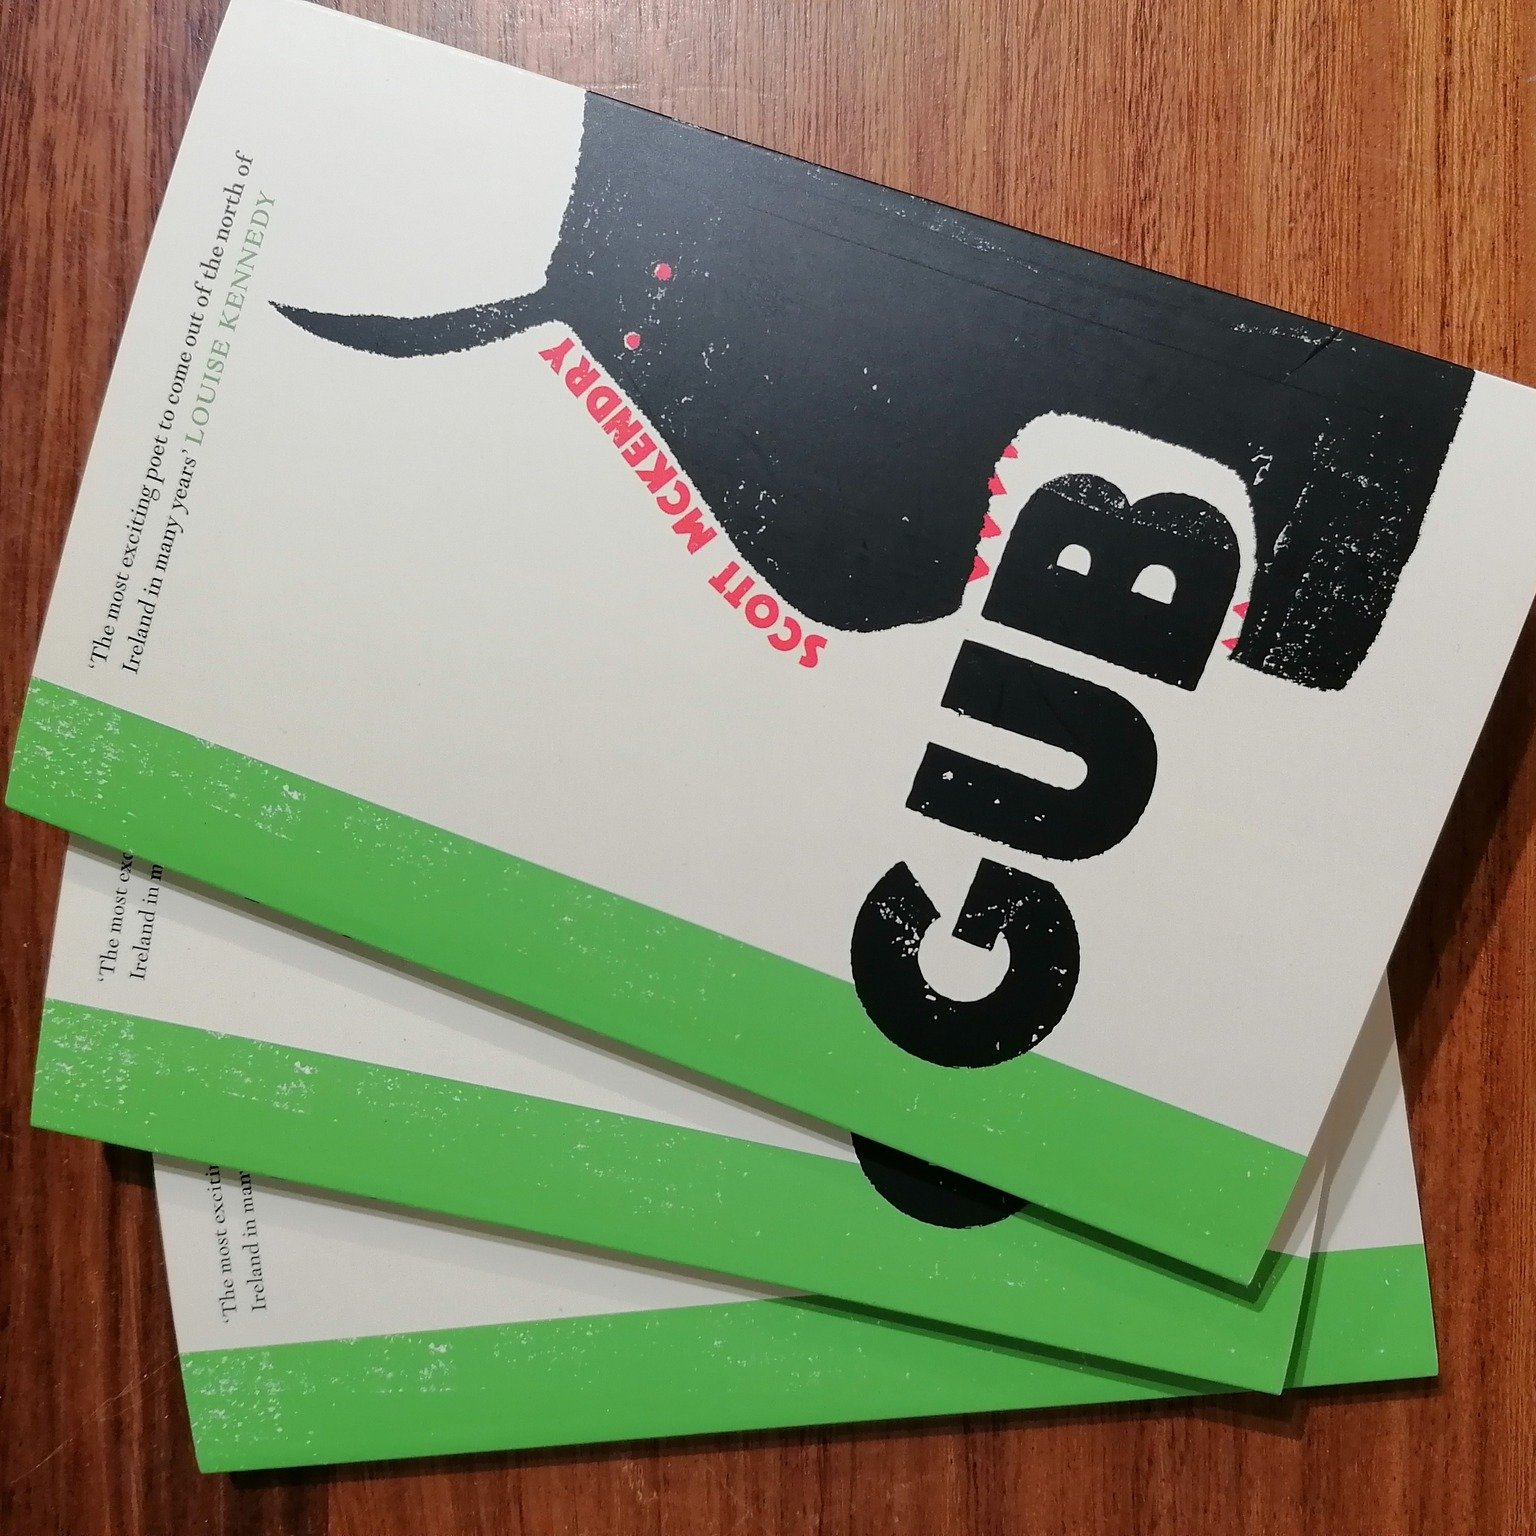 Scott McKendry&rsquo;s debut book of poetry, GUB, is now available to buy in the Duncairn&rsquo;s craft shop.  Scott is a friend of the Duncairn&rsquo;s having performed his works for us, both online during lockdown and recently in the centre. We&rsq